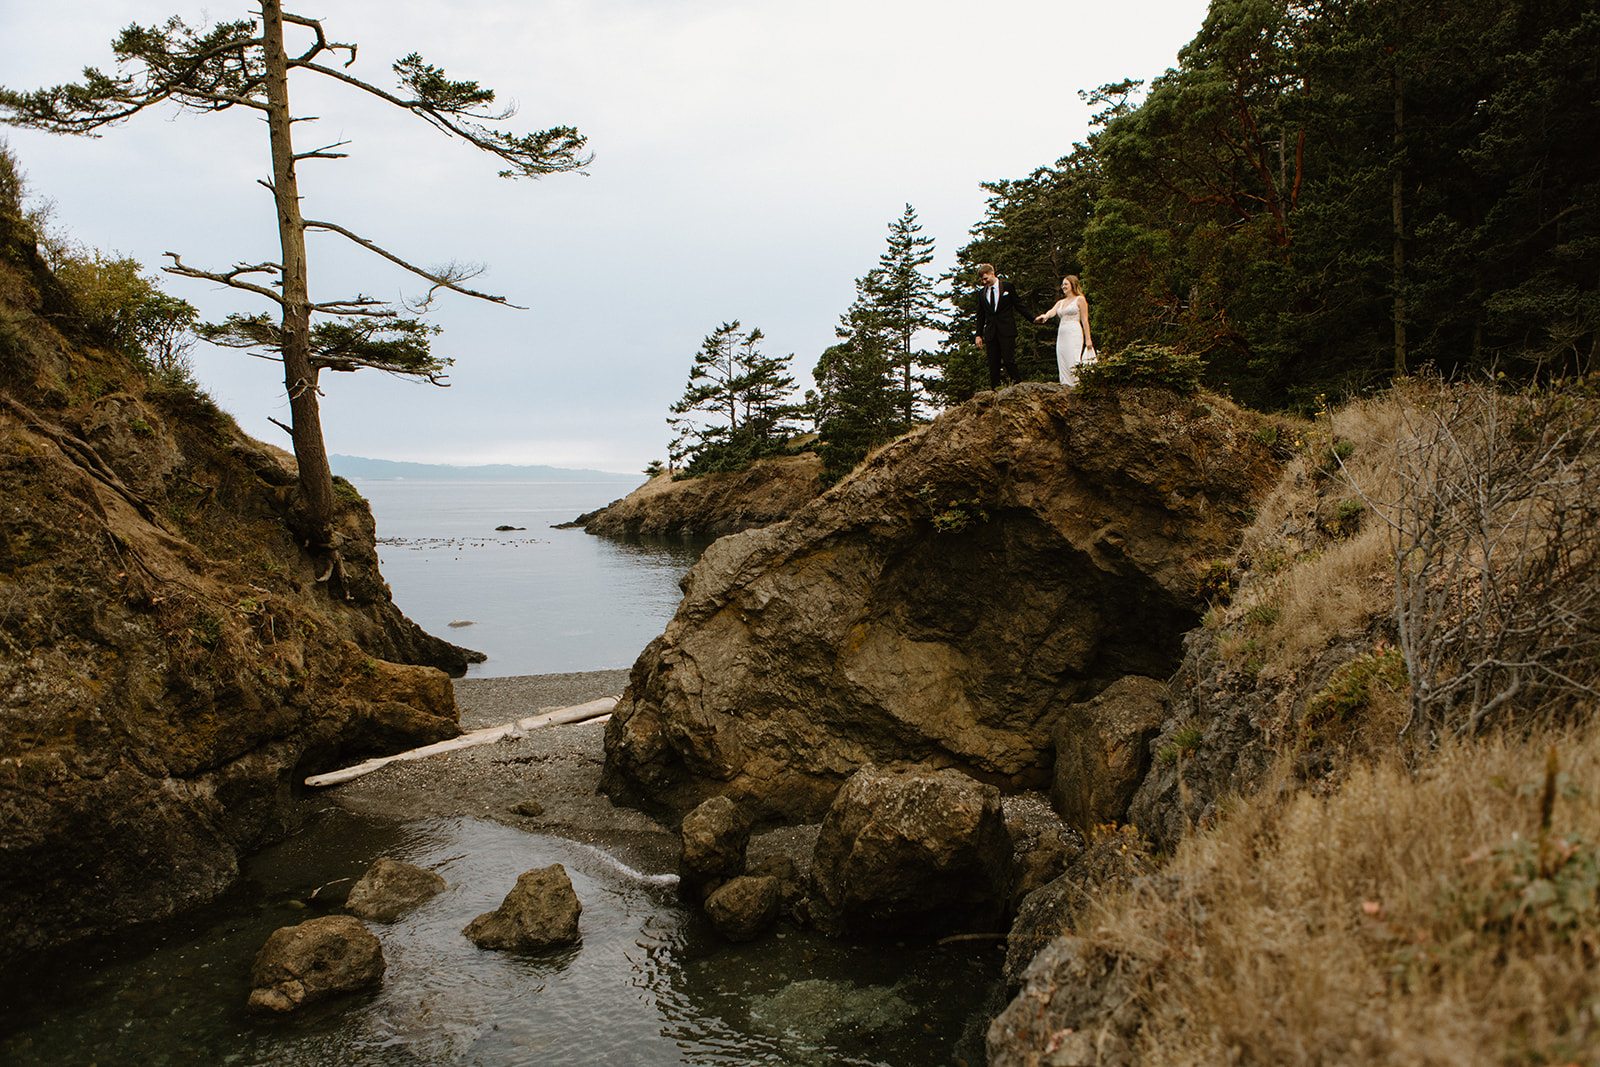 A forested, coastal photoshoot with a couple in their wedding attire at Deception Pass in Washington state.